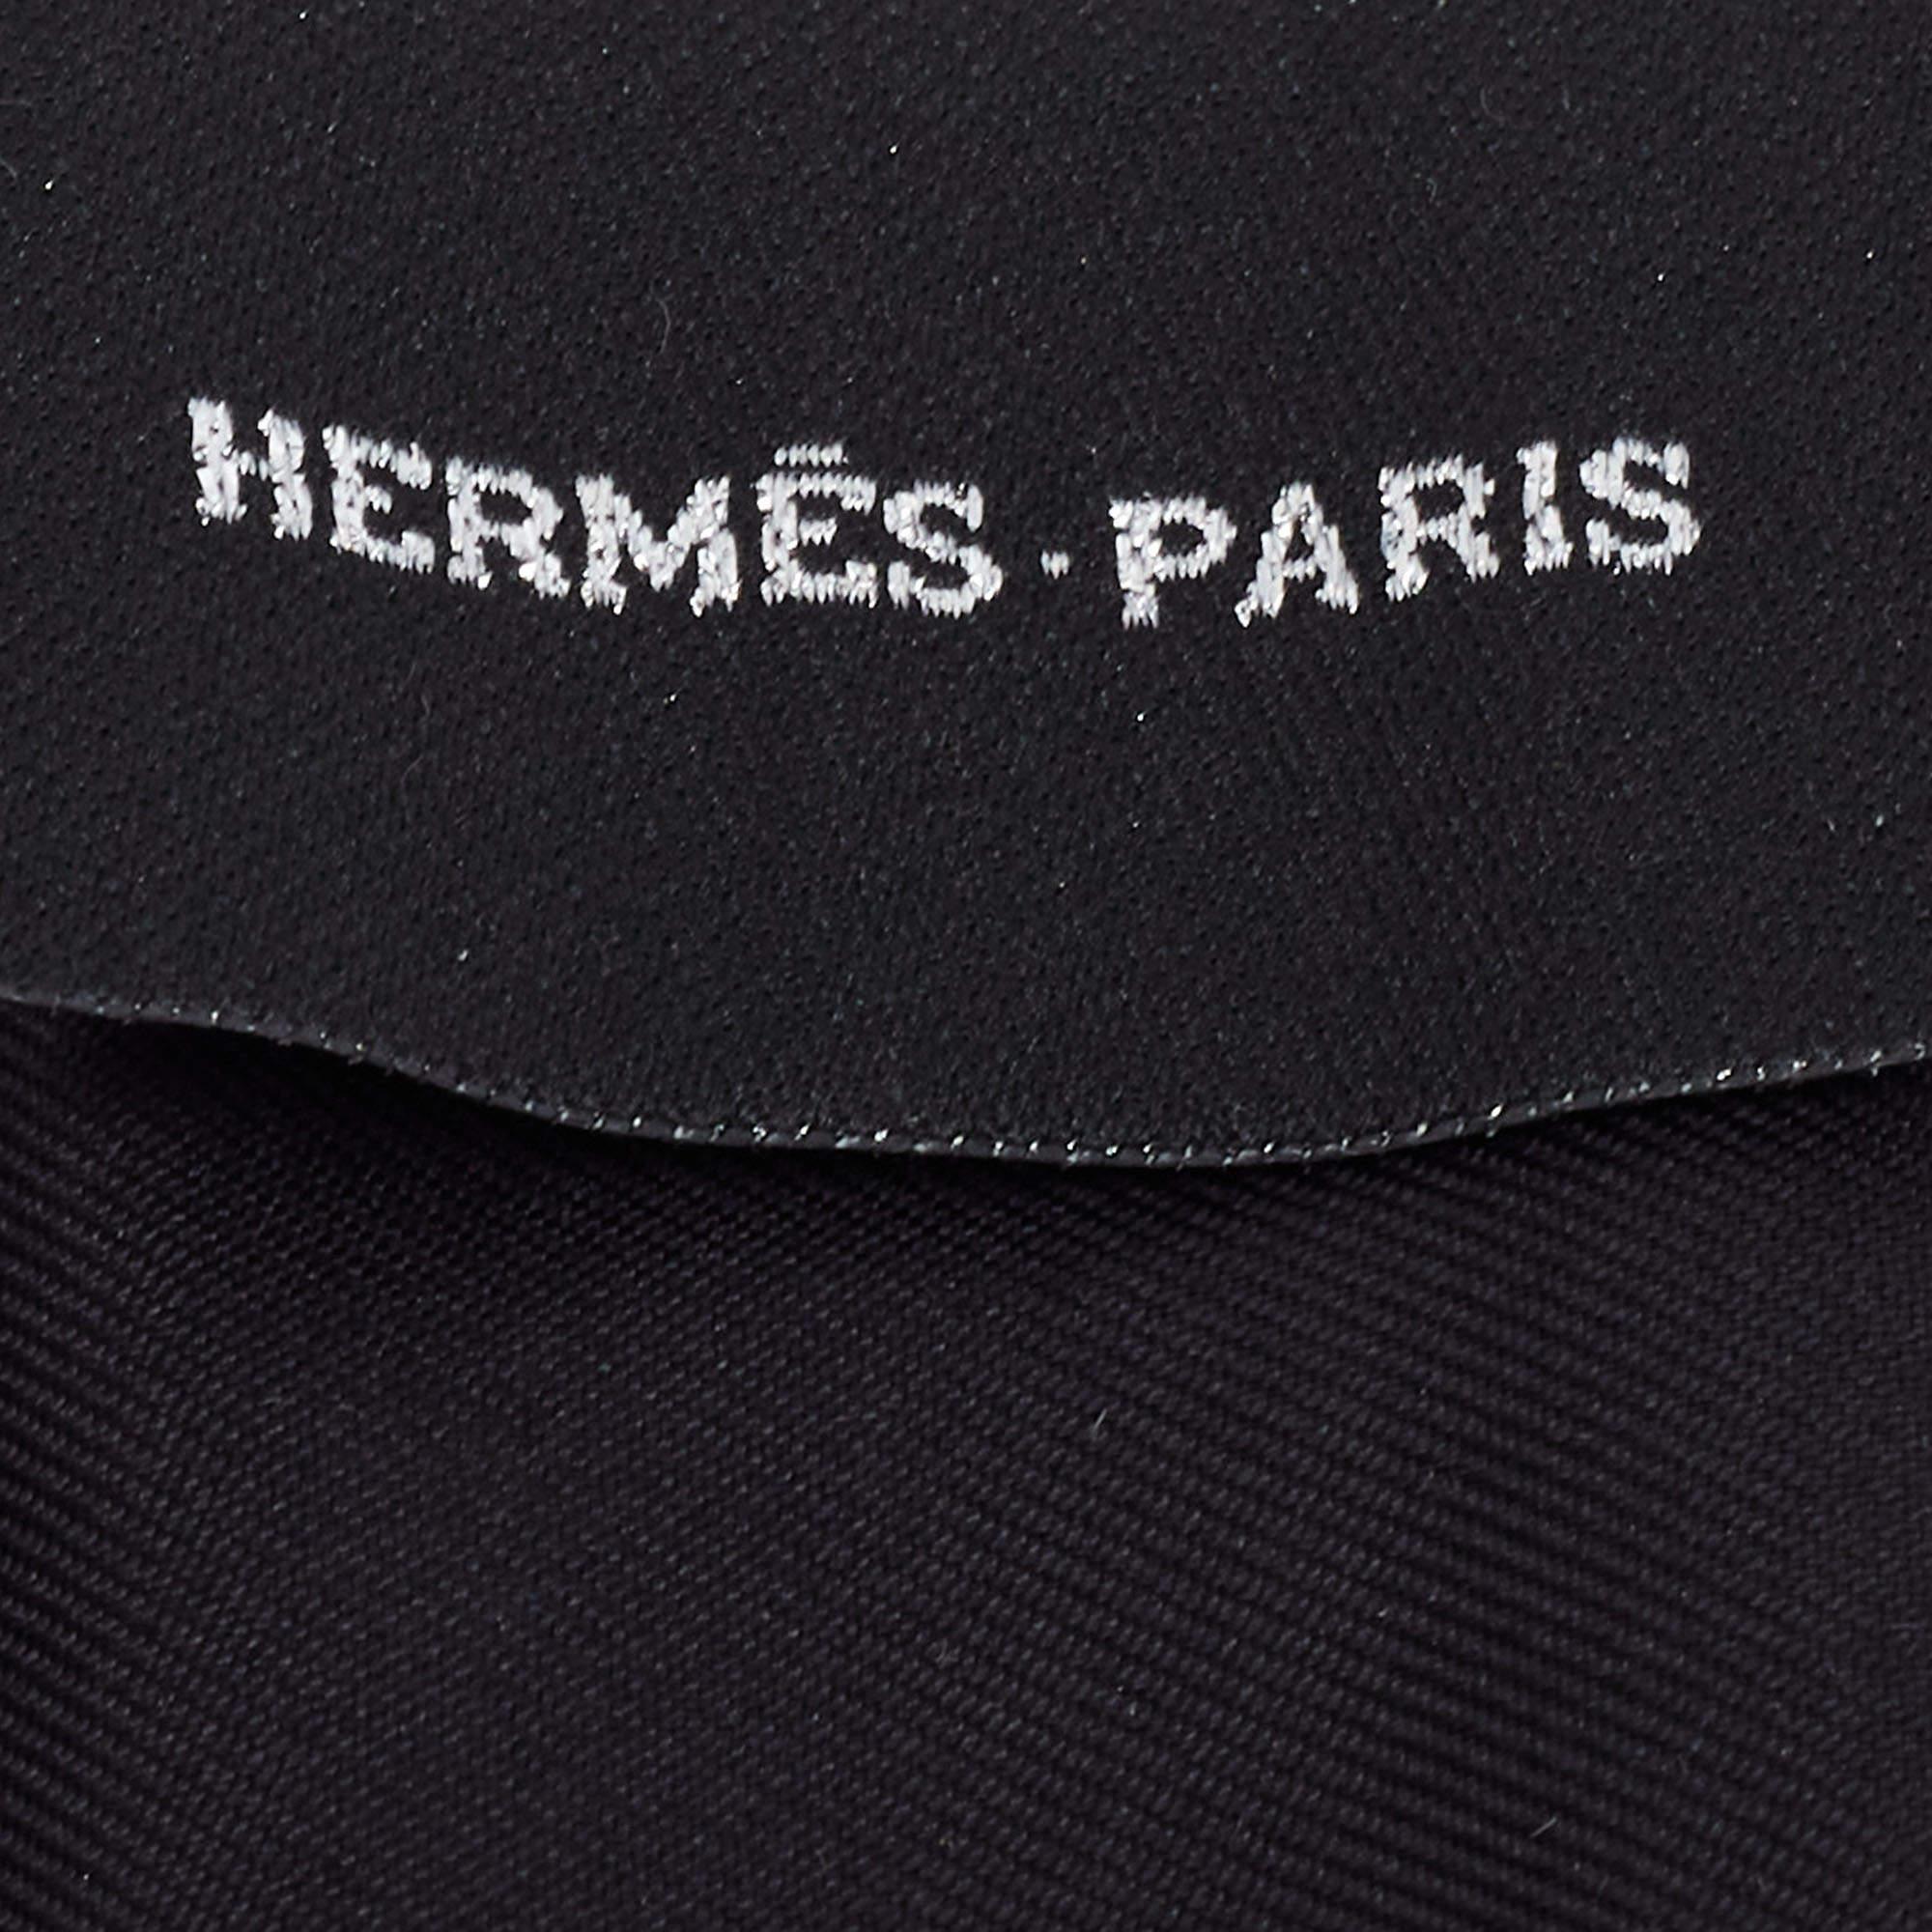 The Hermès twilly is an exquisite accessory crafted from luxurious silk adorned with shimmering black sequins. This versatile and elegant piece can be worn as a headband, necktie, or wrapped around a handbag handle, adding a touch of sophistication